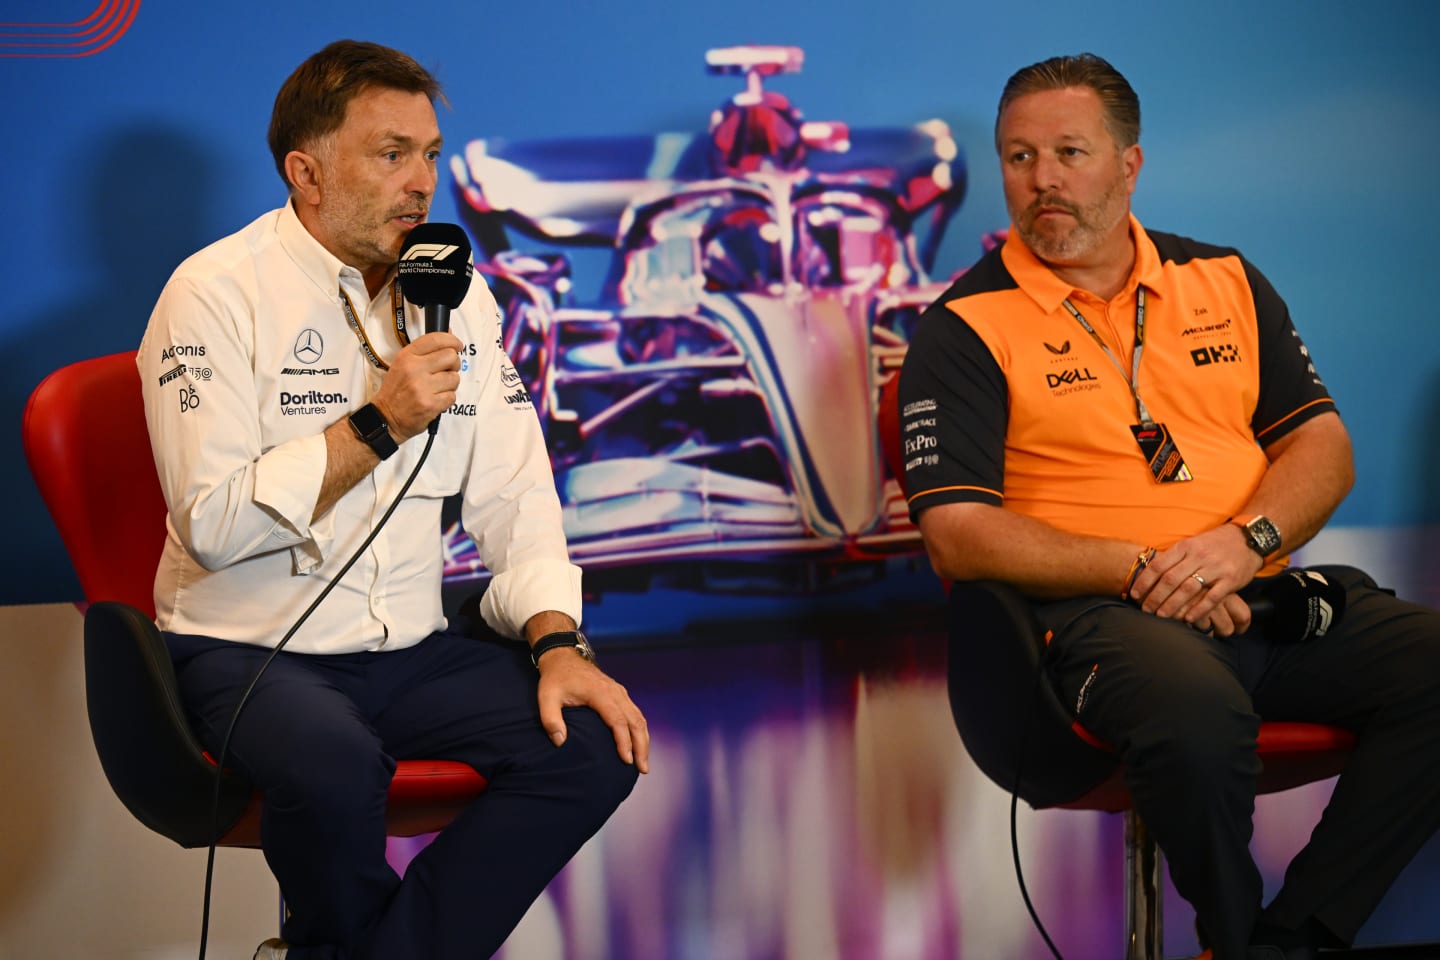 AUSTIN, TEXAS - OCTOBER 22: Jost Capito, CEO of Williams F1 and McLaren Chief Executive Officer Zak Brown attend the Team Principals Press Conference prior to final practice ahead of the F1 Grand Prix of USA at Circuit of The Americas on October 22, 2022 in Austin, Texas. (Photo by Clive Mason/Getty Images)